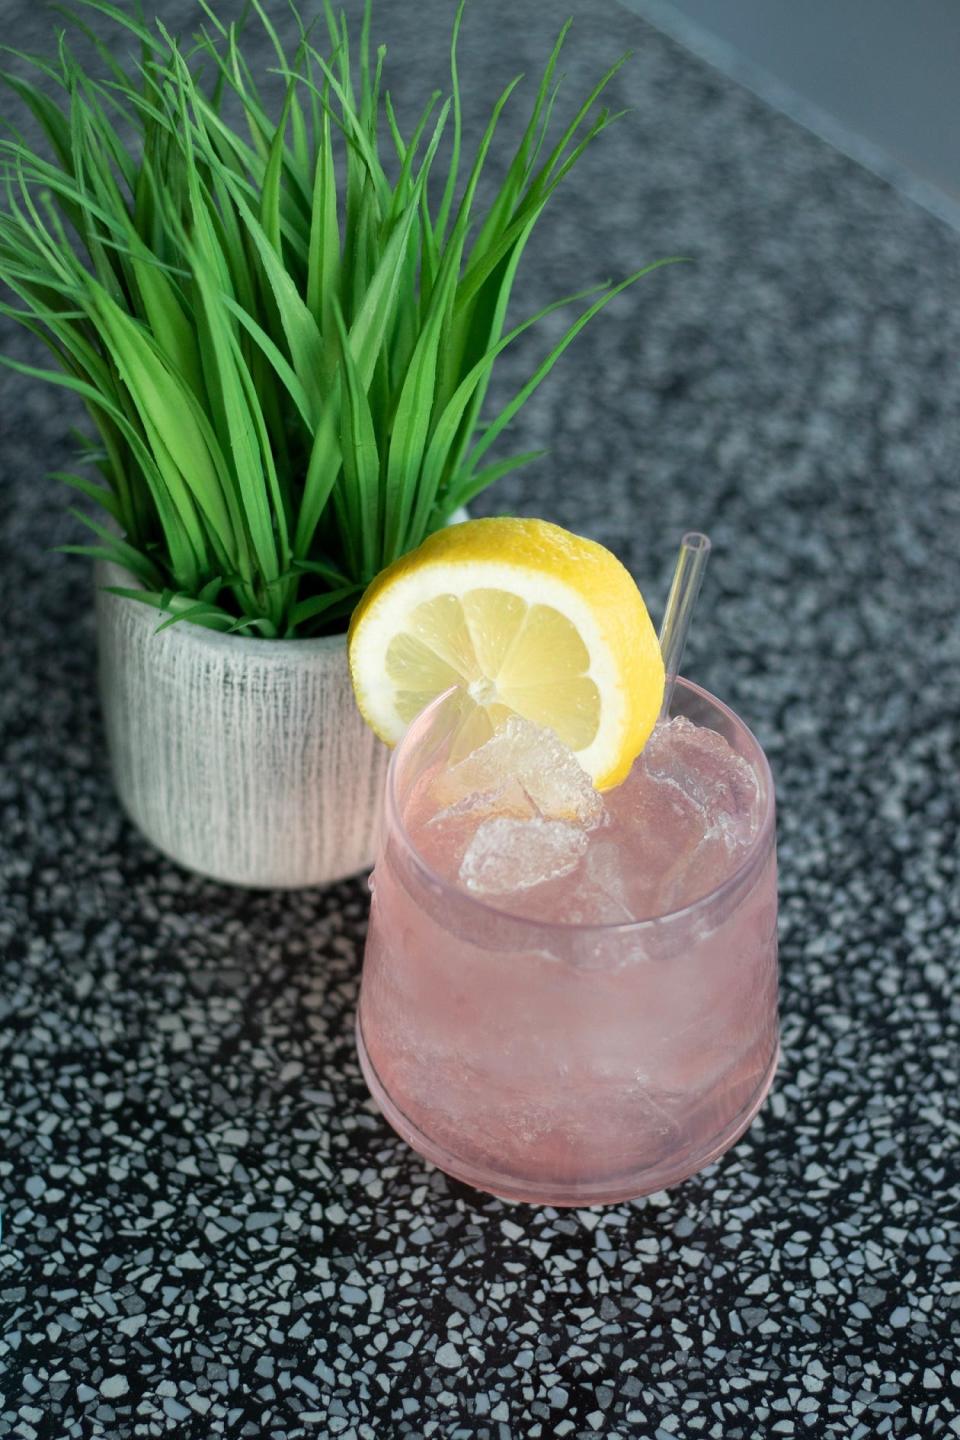 The Kissed By A Rose cocktail at Alibi, downtown Tempe's newest rooftop pool bar. The cocktail is made with Effen Rose Vodka, Pama Marie Brizard, watermelon, lemon juice and hibiscus flower water.